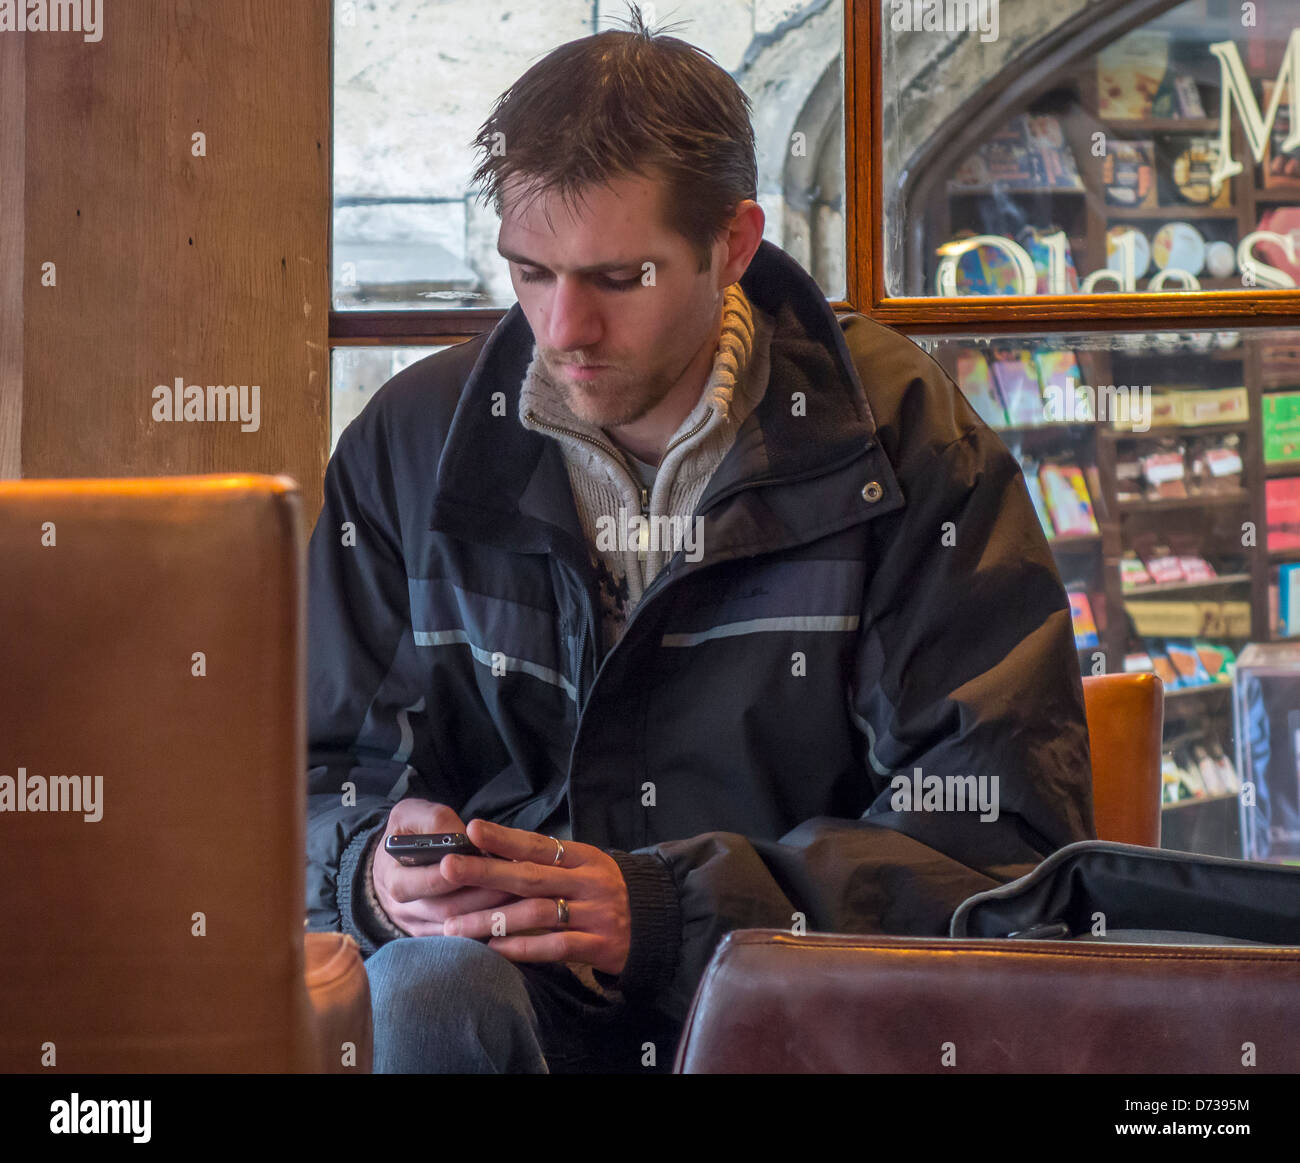 Man texting in coffee shop using mobile phone Banque D'Images